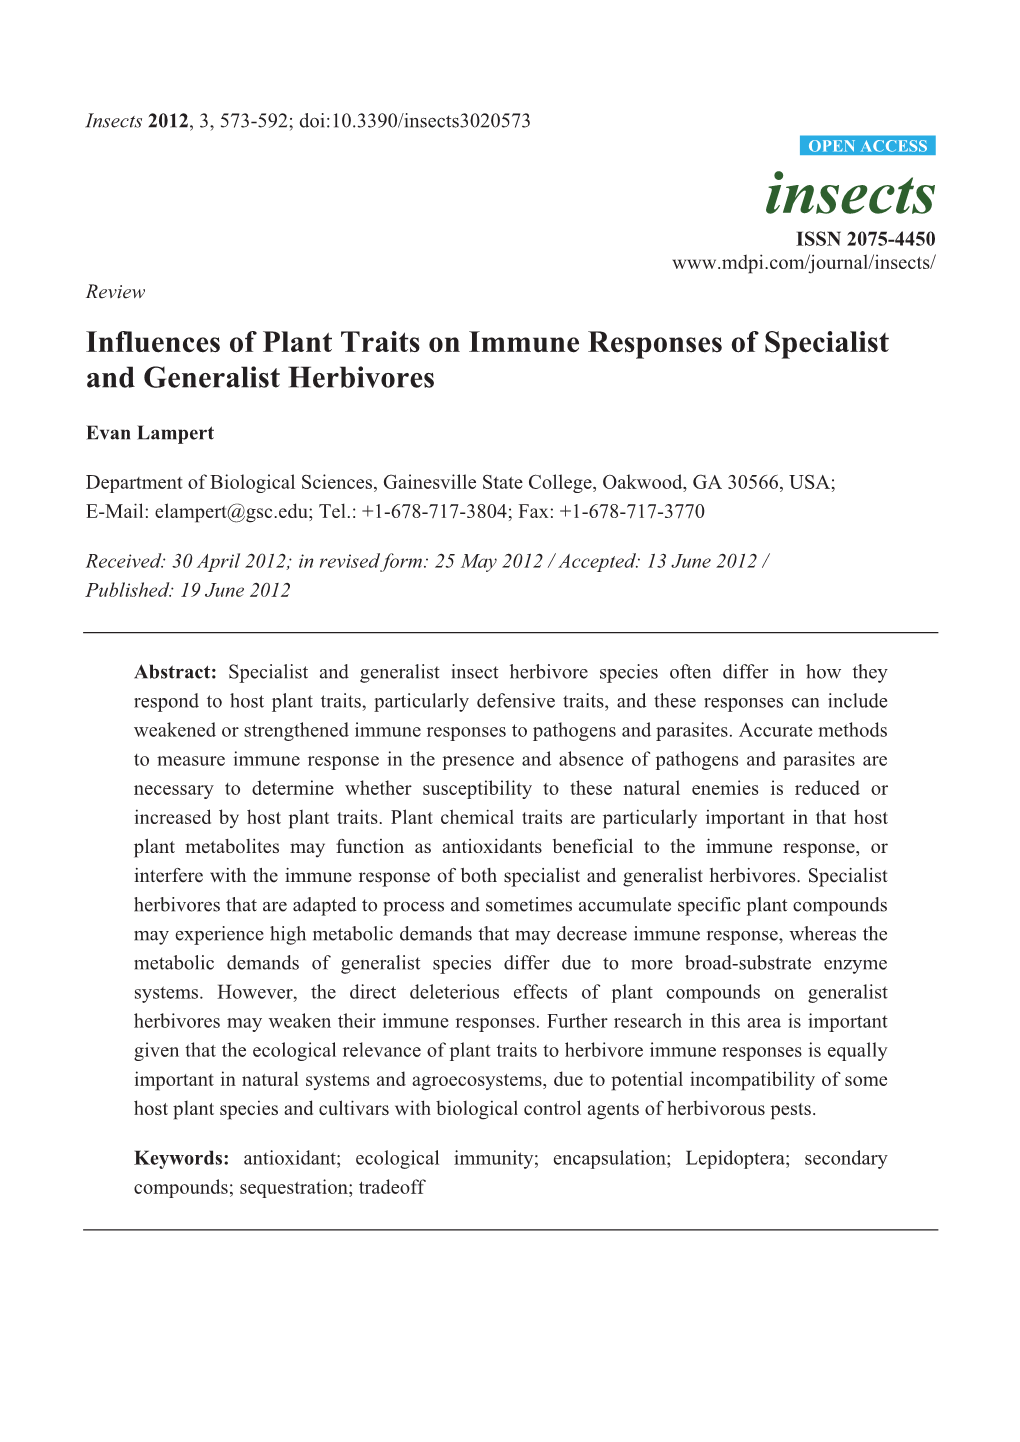 Influences of Plant Traits on Immune Responses of Specialist and Generalist Herbivores